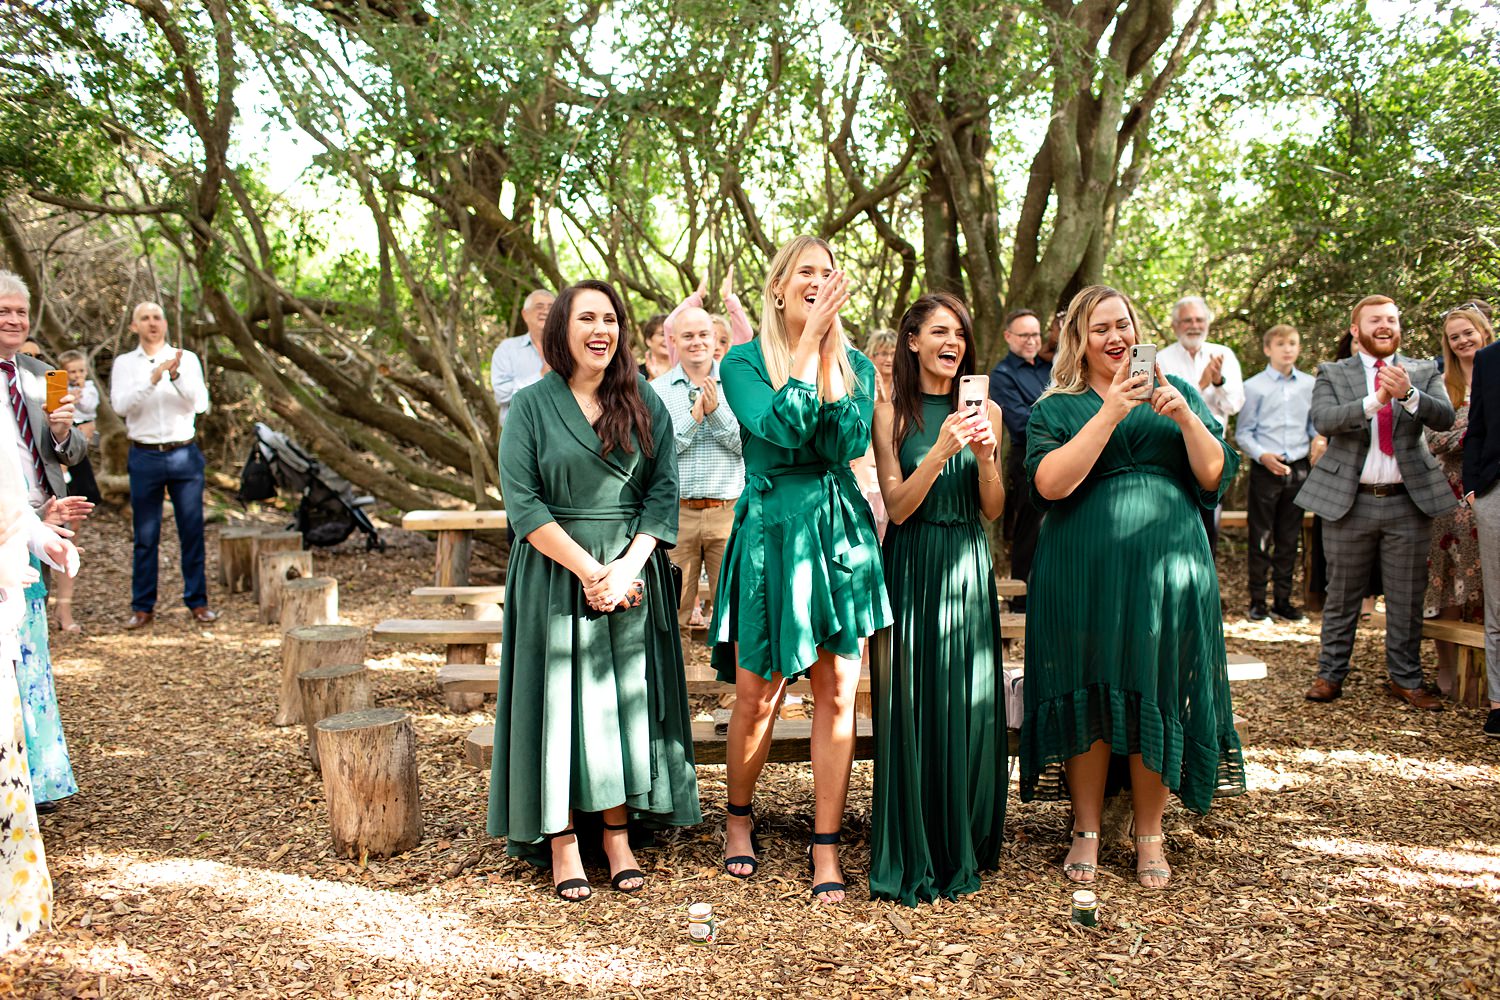 Wedding guests clap and cheer as the couple are pronounced husband and wife. Image by wedding photographer in South Africa, Niki M Photography